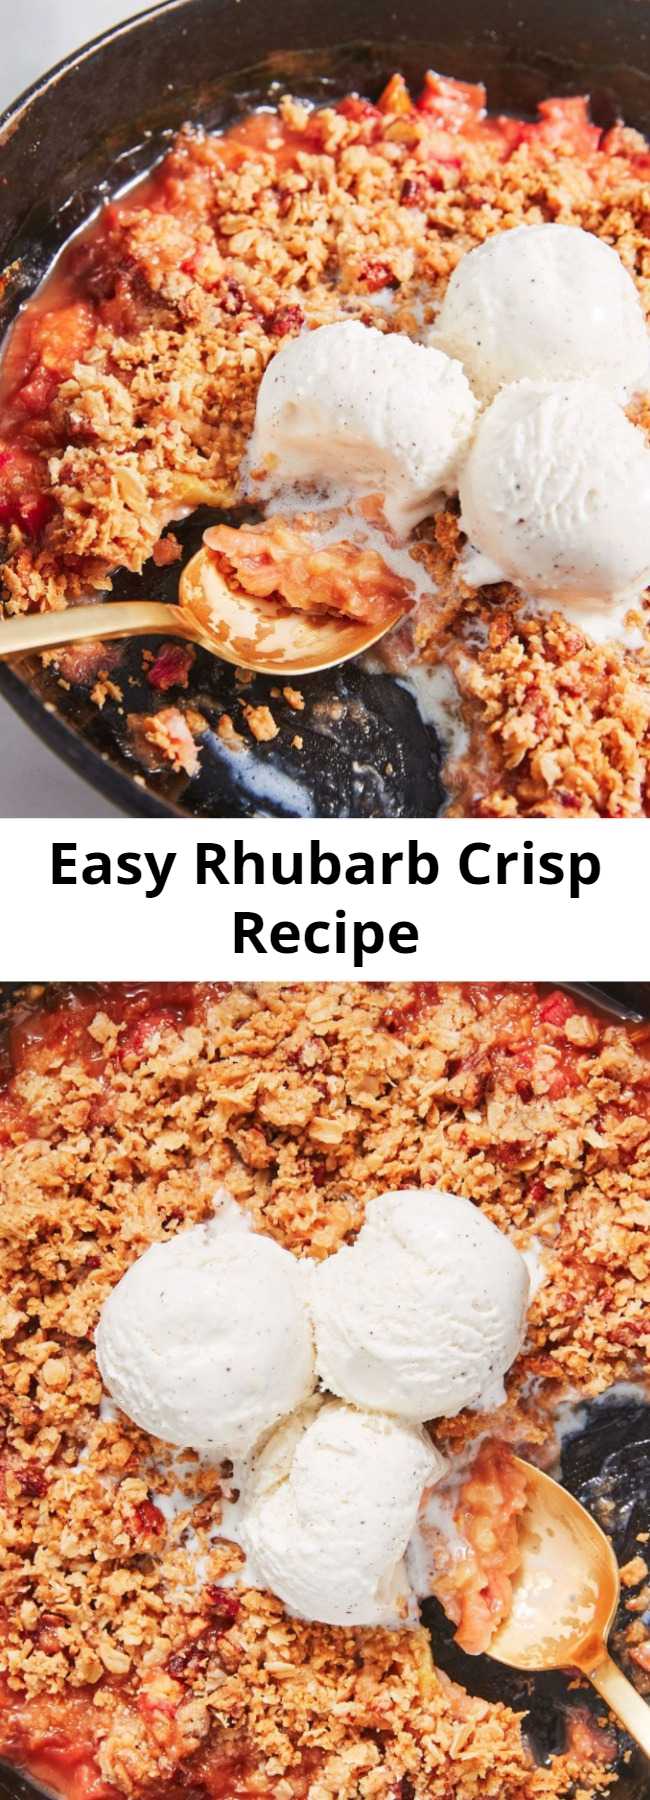 Easy Rhubarb Crisp Recipe - Savor every day of rhubarb season with this simple and perfect Rhubarb Crisp. The buttery oat crumble balances out the tartness of the rhubarb in the most amazing way. Add ice cream, and you're in dessert heaven.